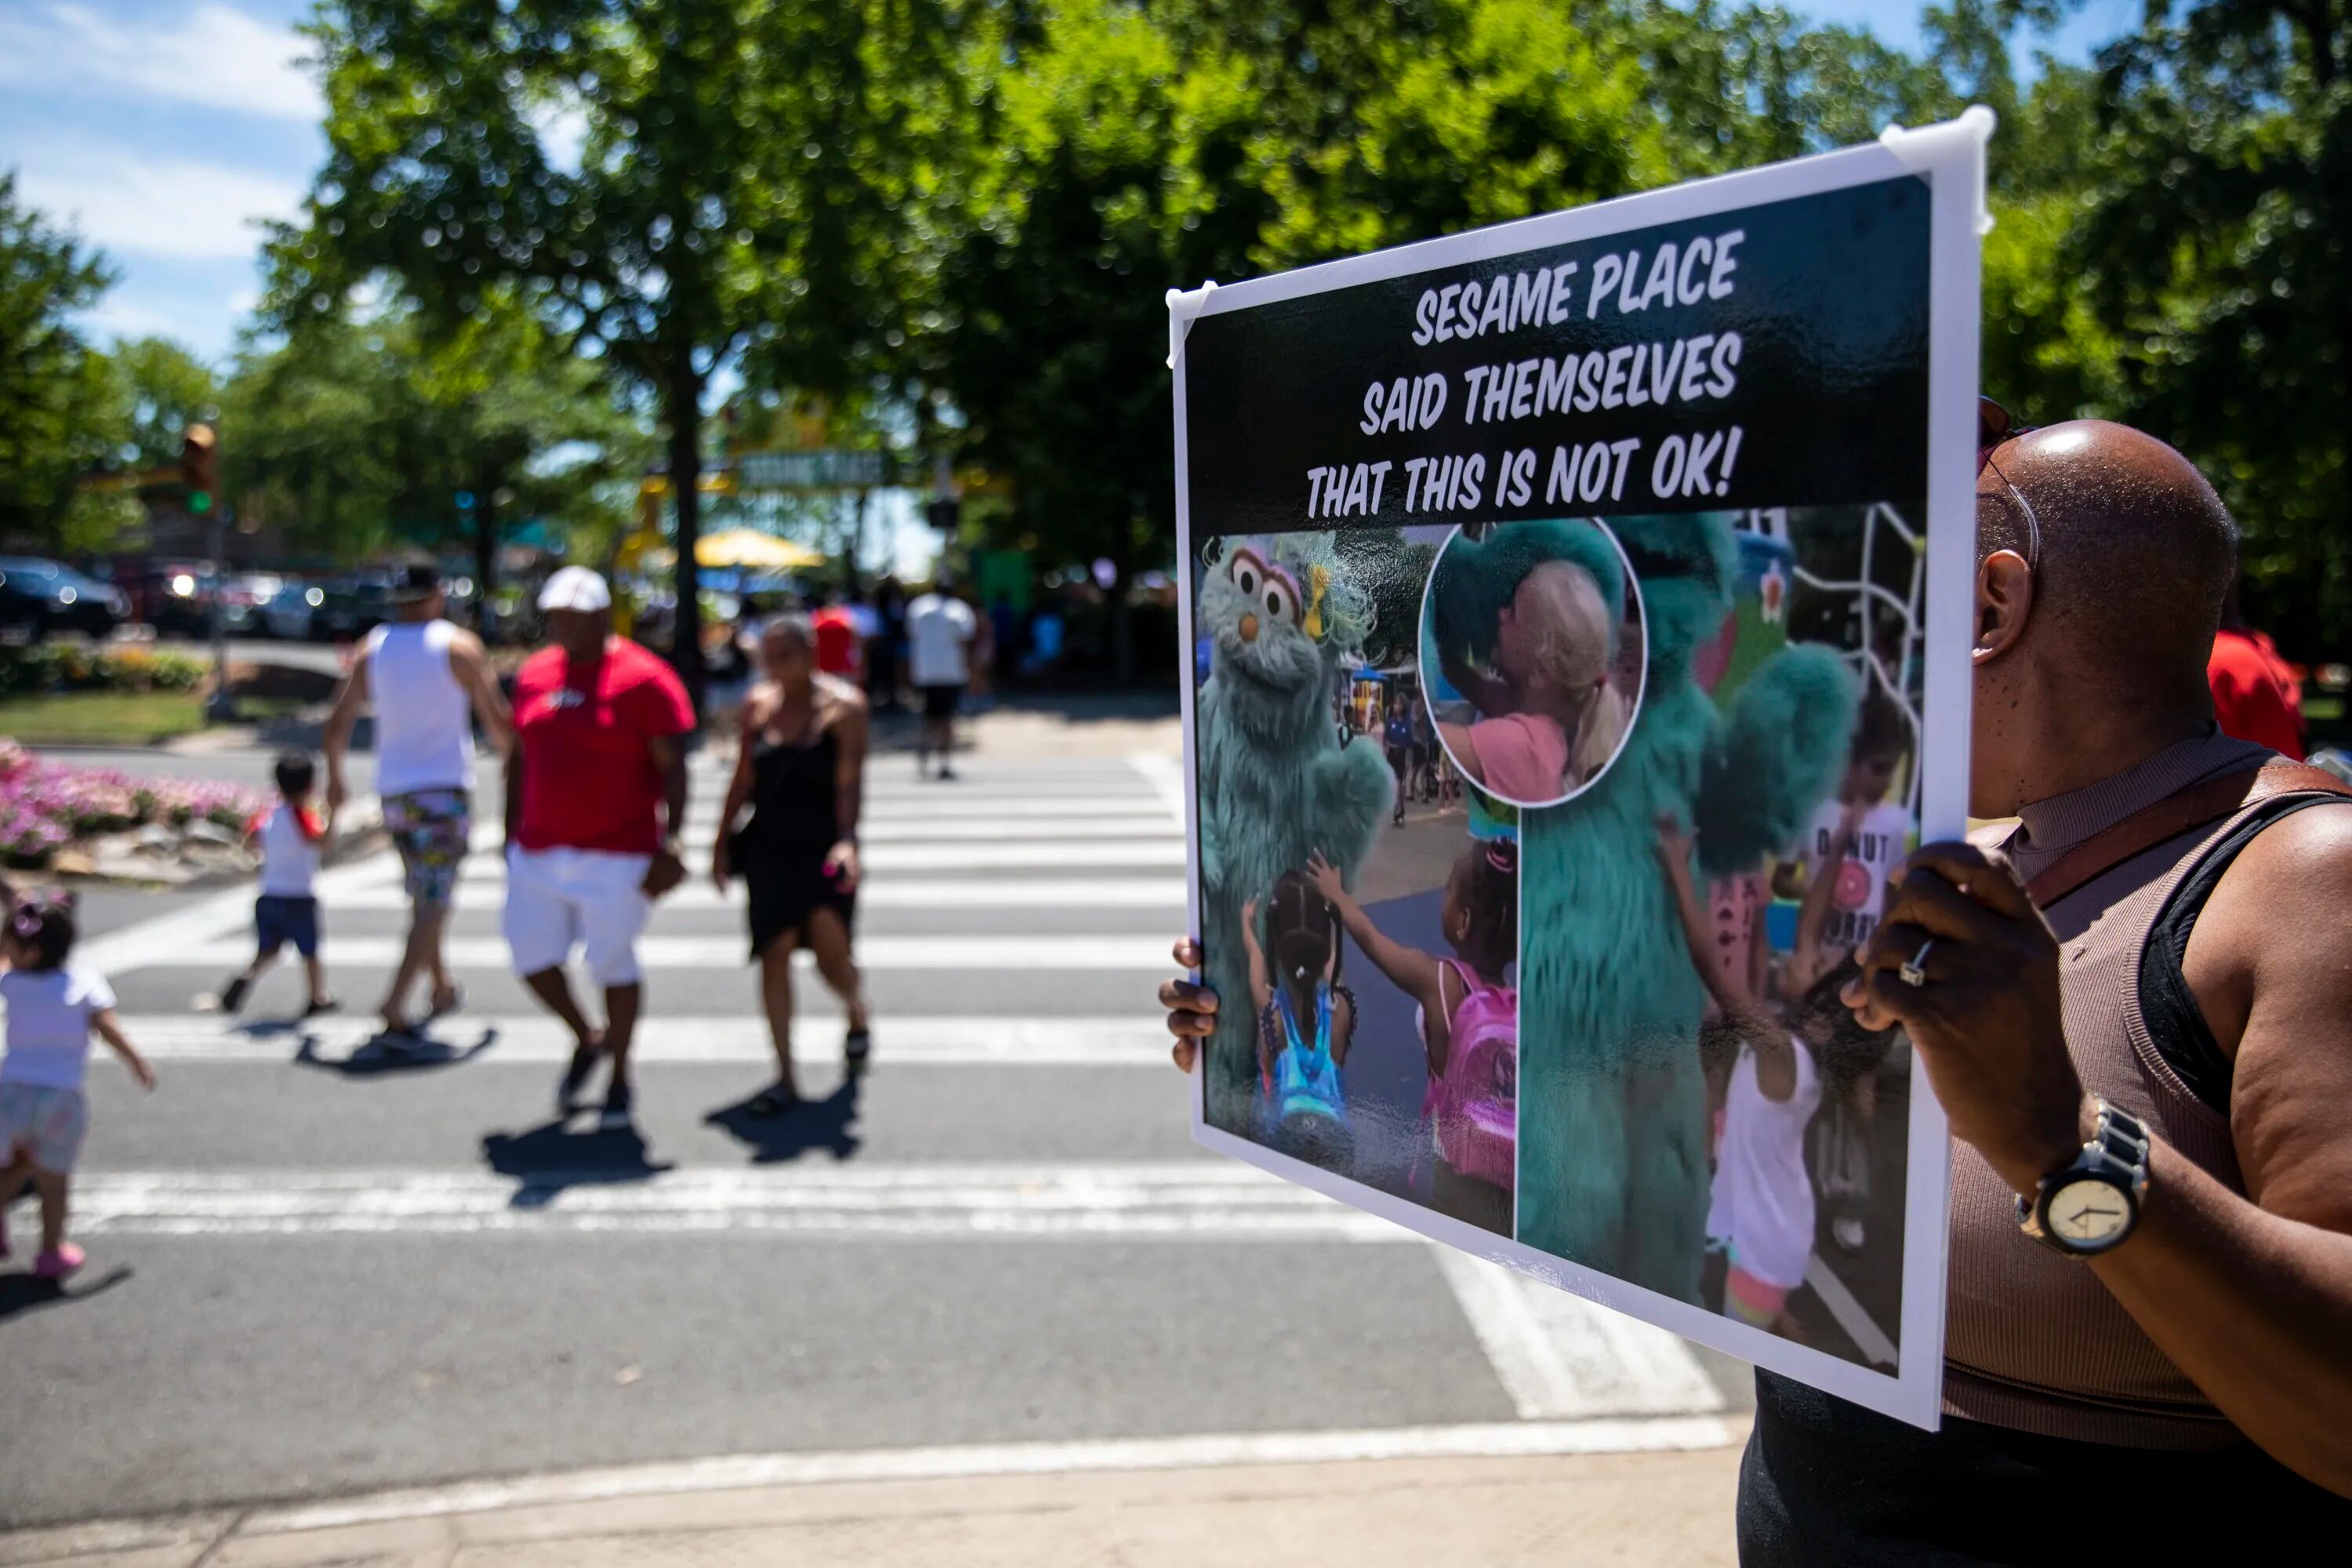 Protesters again targeted Sesame Place over snubbing of Black children - The Philadelphia Inquirer